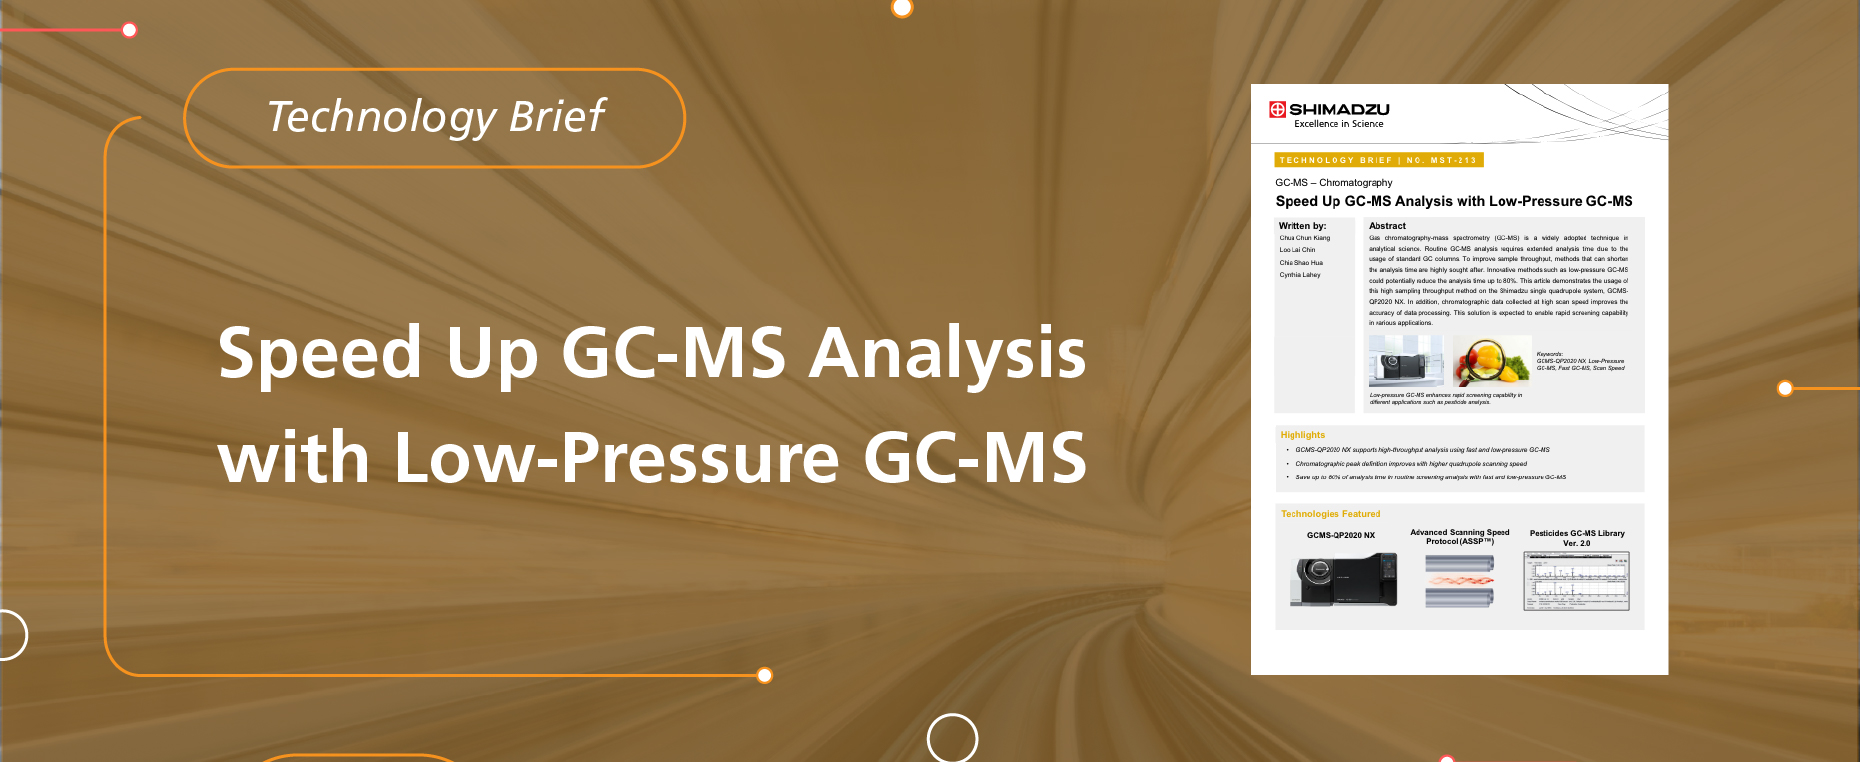 Speed Up GC-MS Analysis with Low-Pressure GC-MS